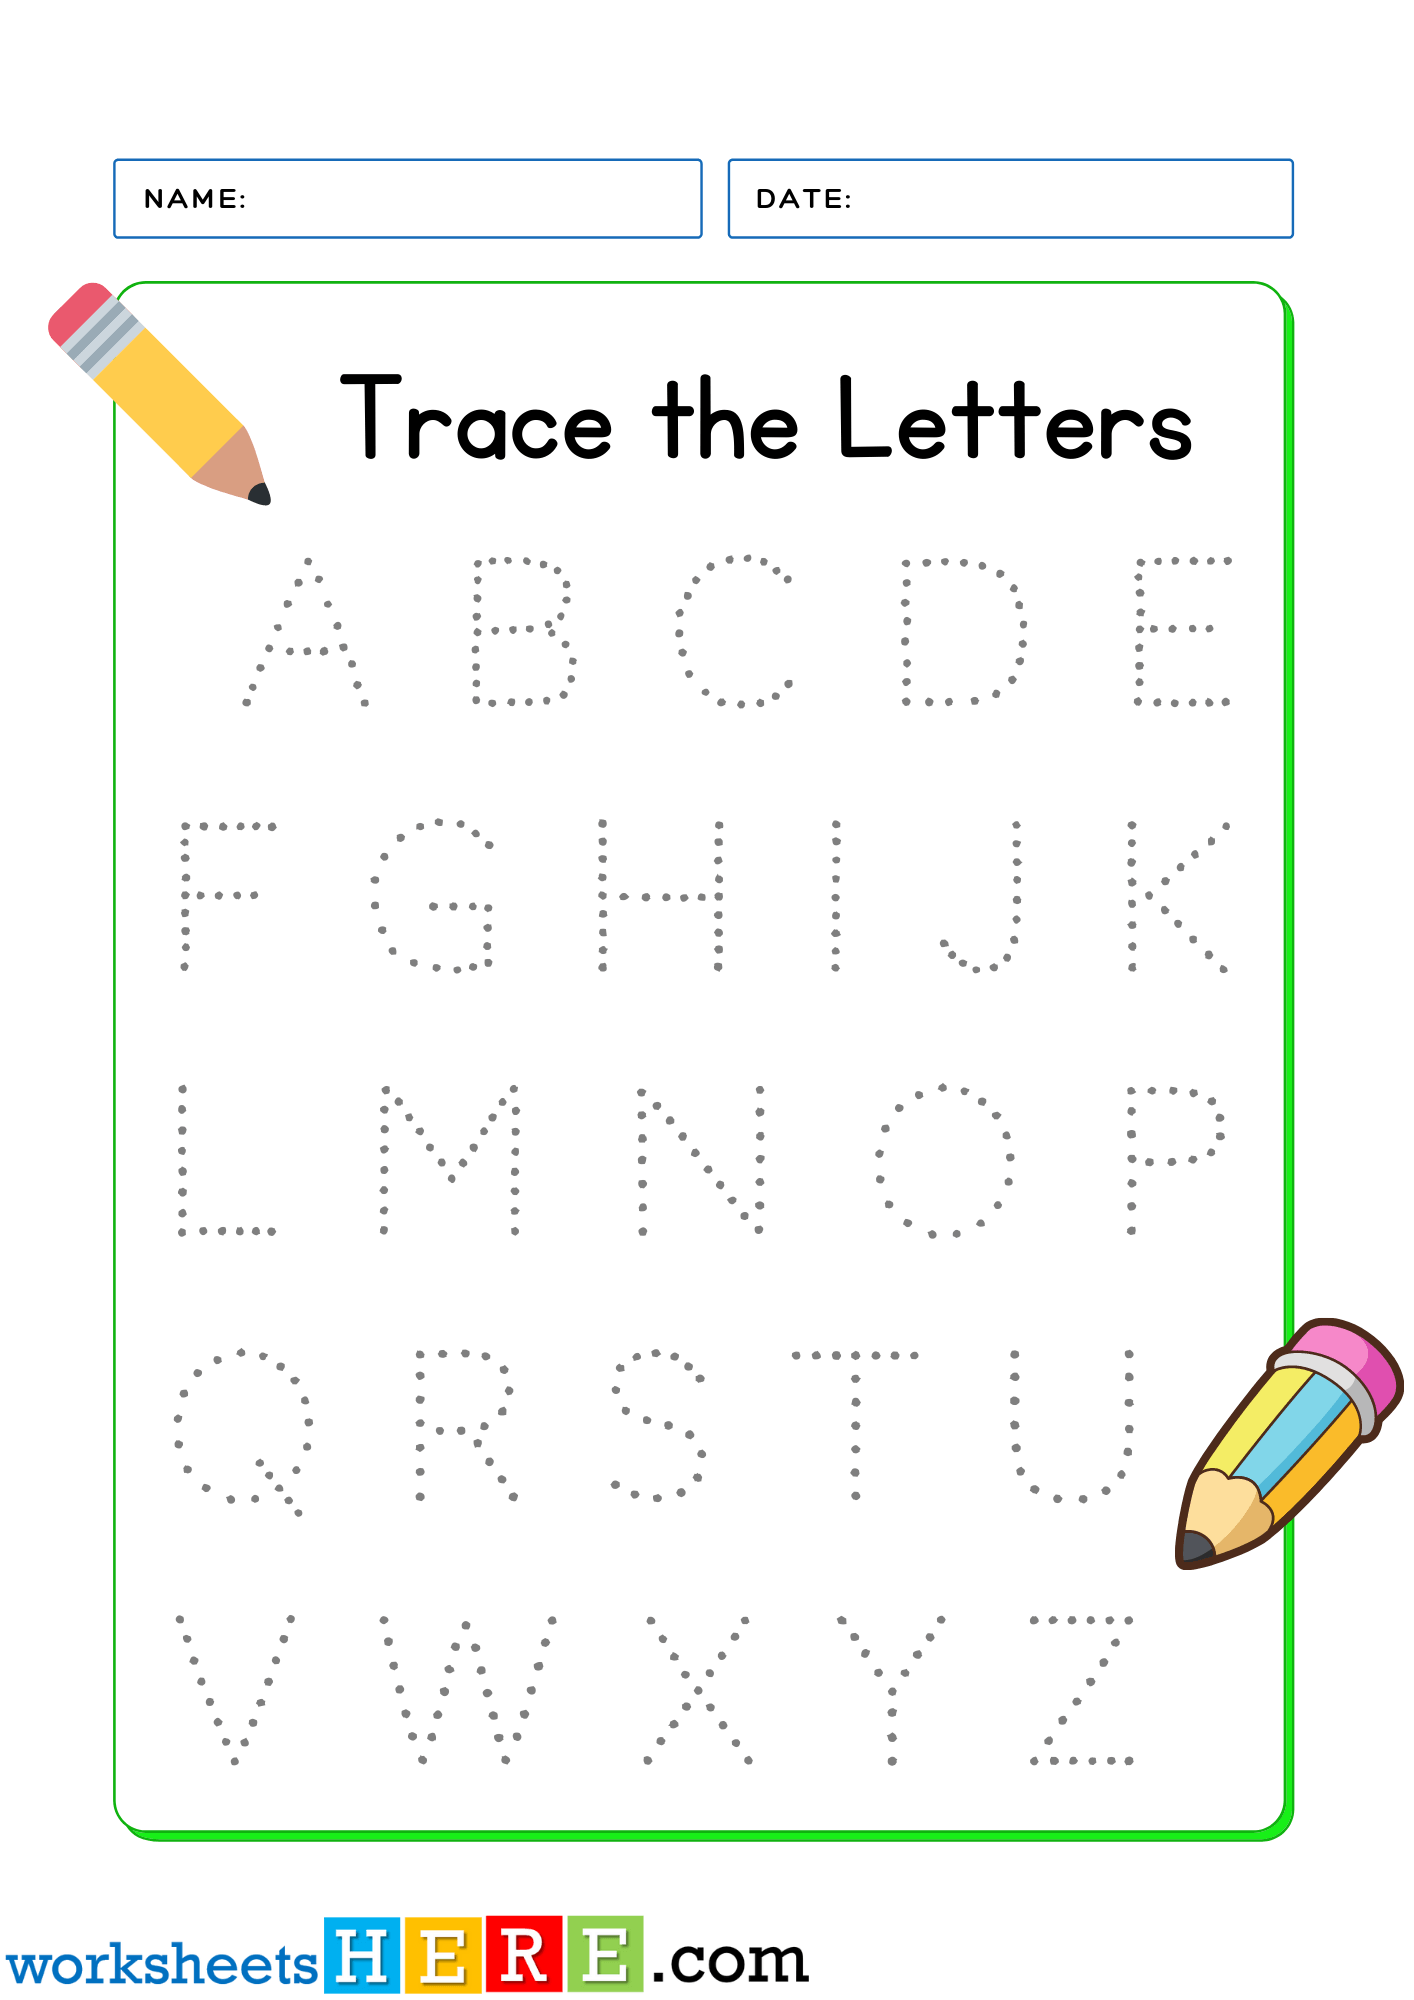 Trace the Letters From A to Z Printable PDF Worksheet For Kindergarten and Kids